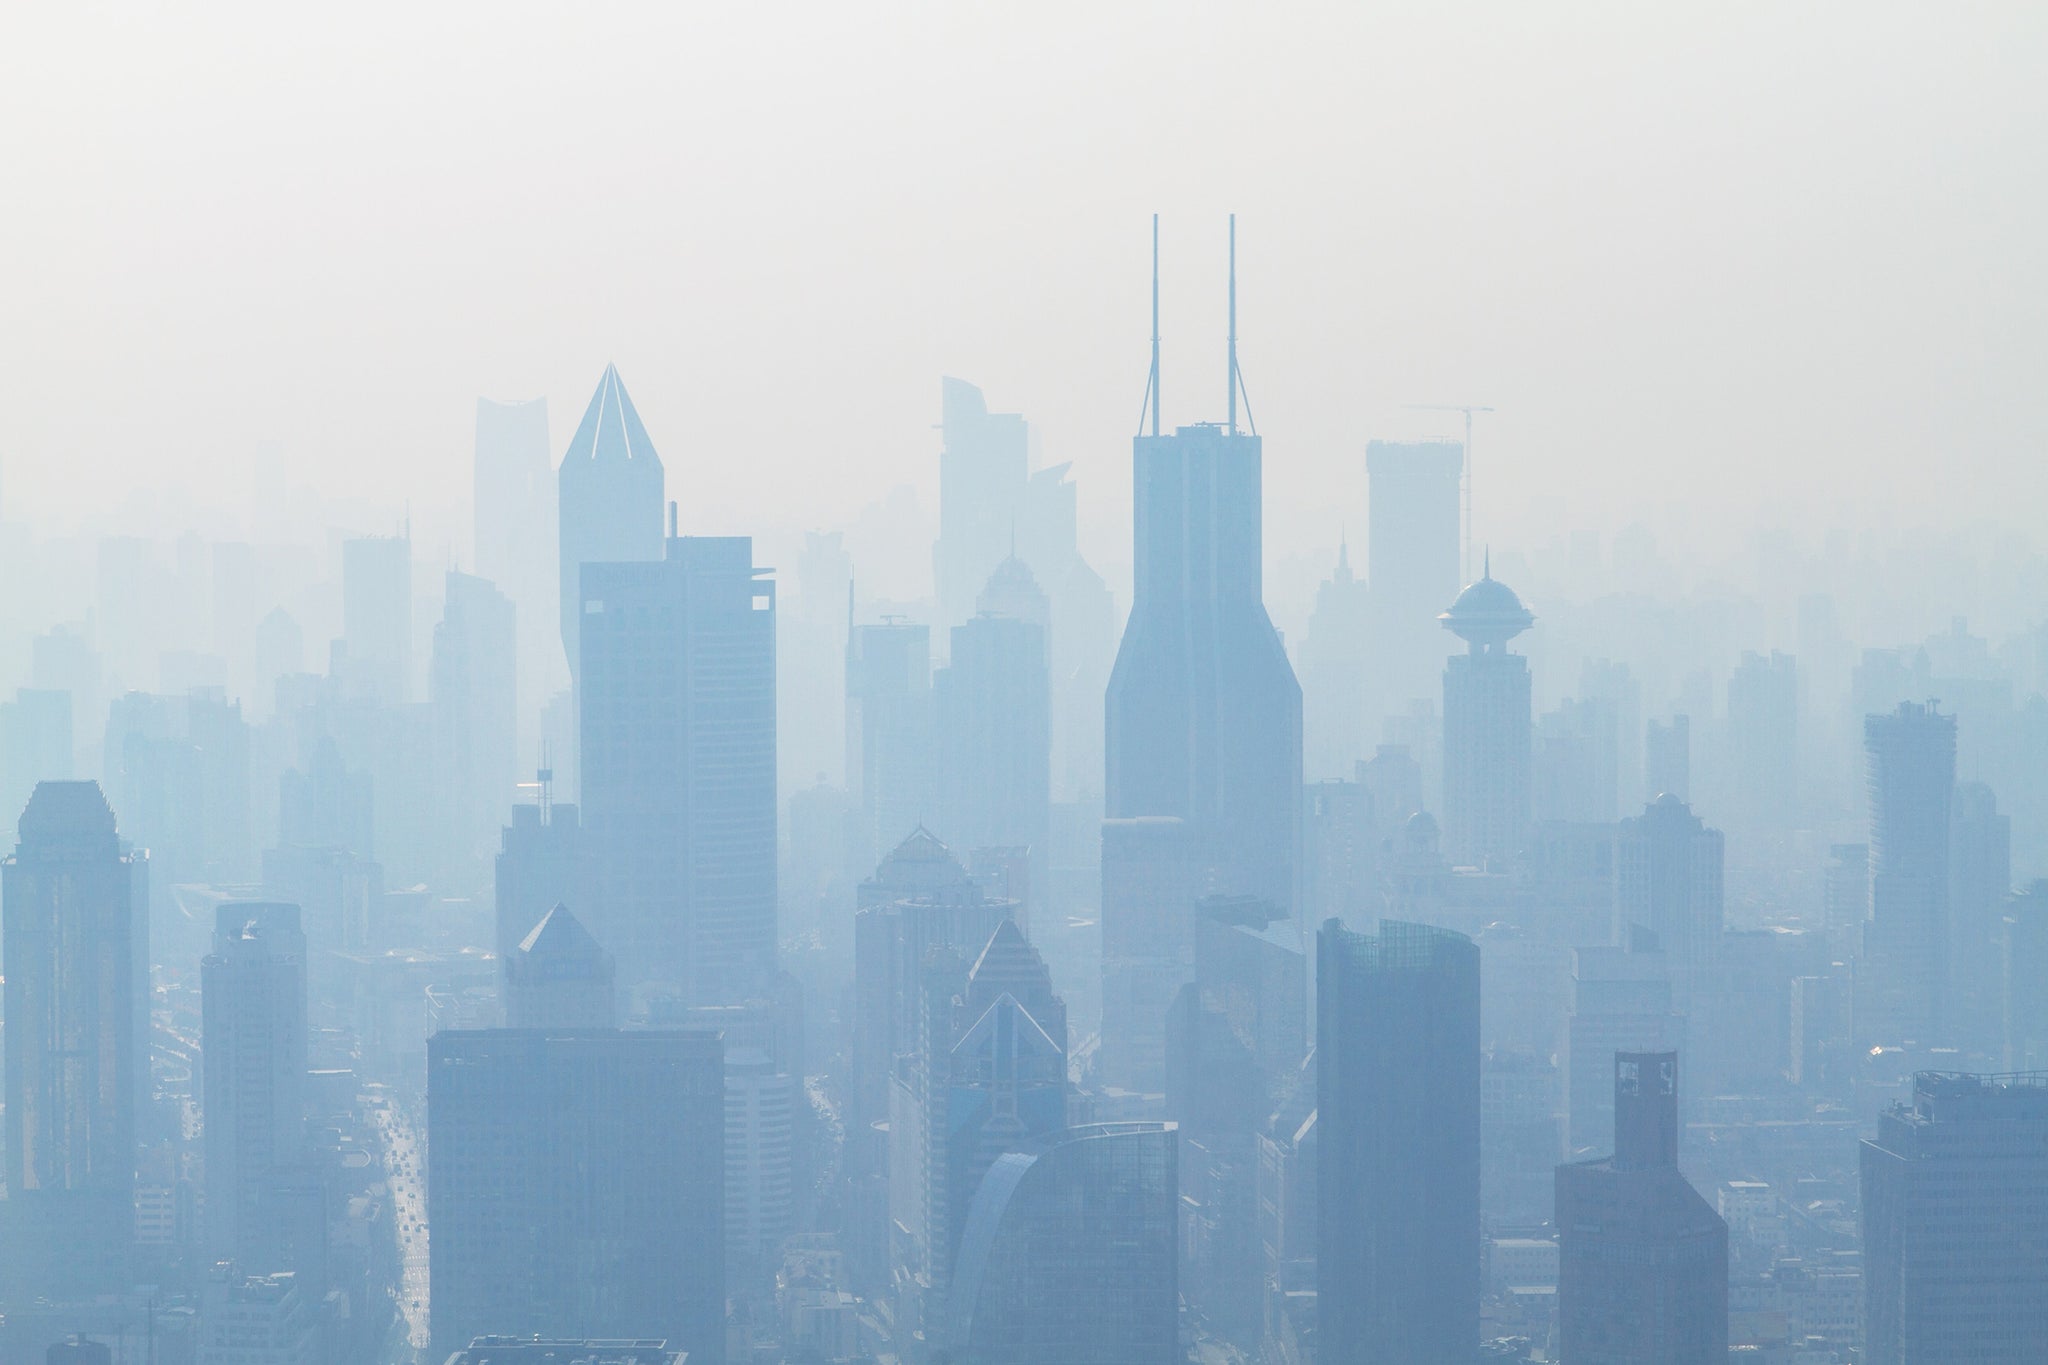 Could air pollution make coronavirus infections deadlier?